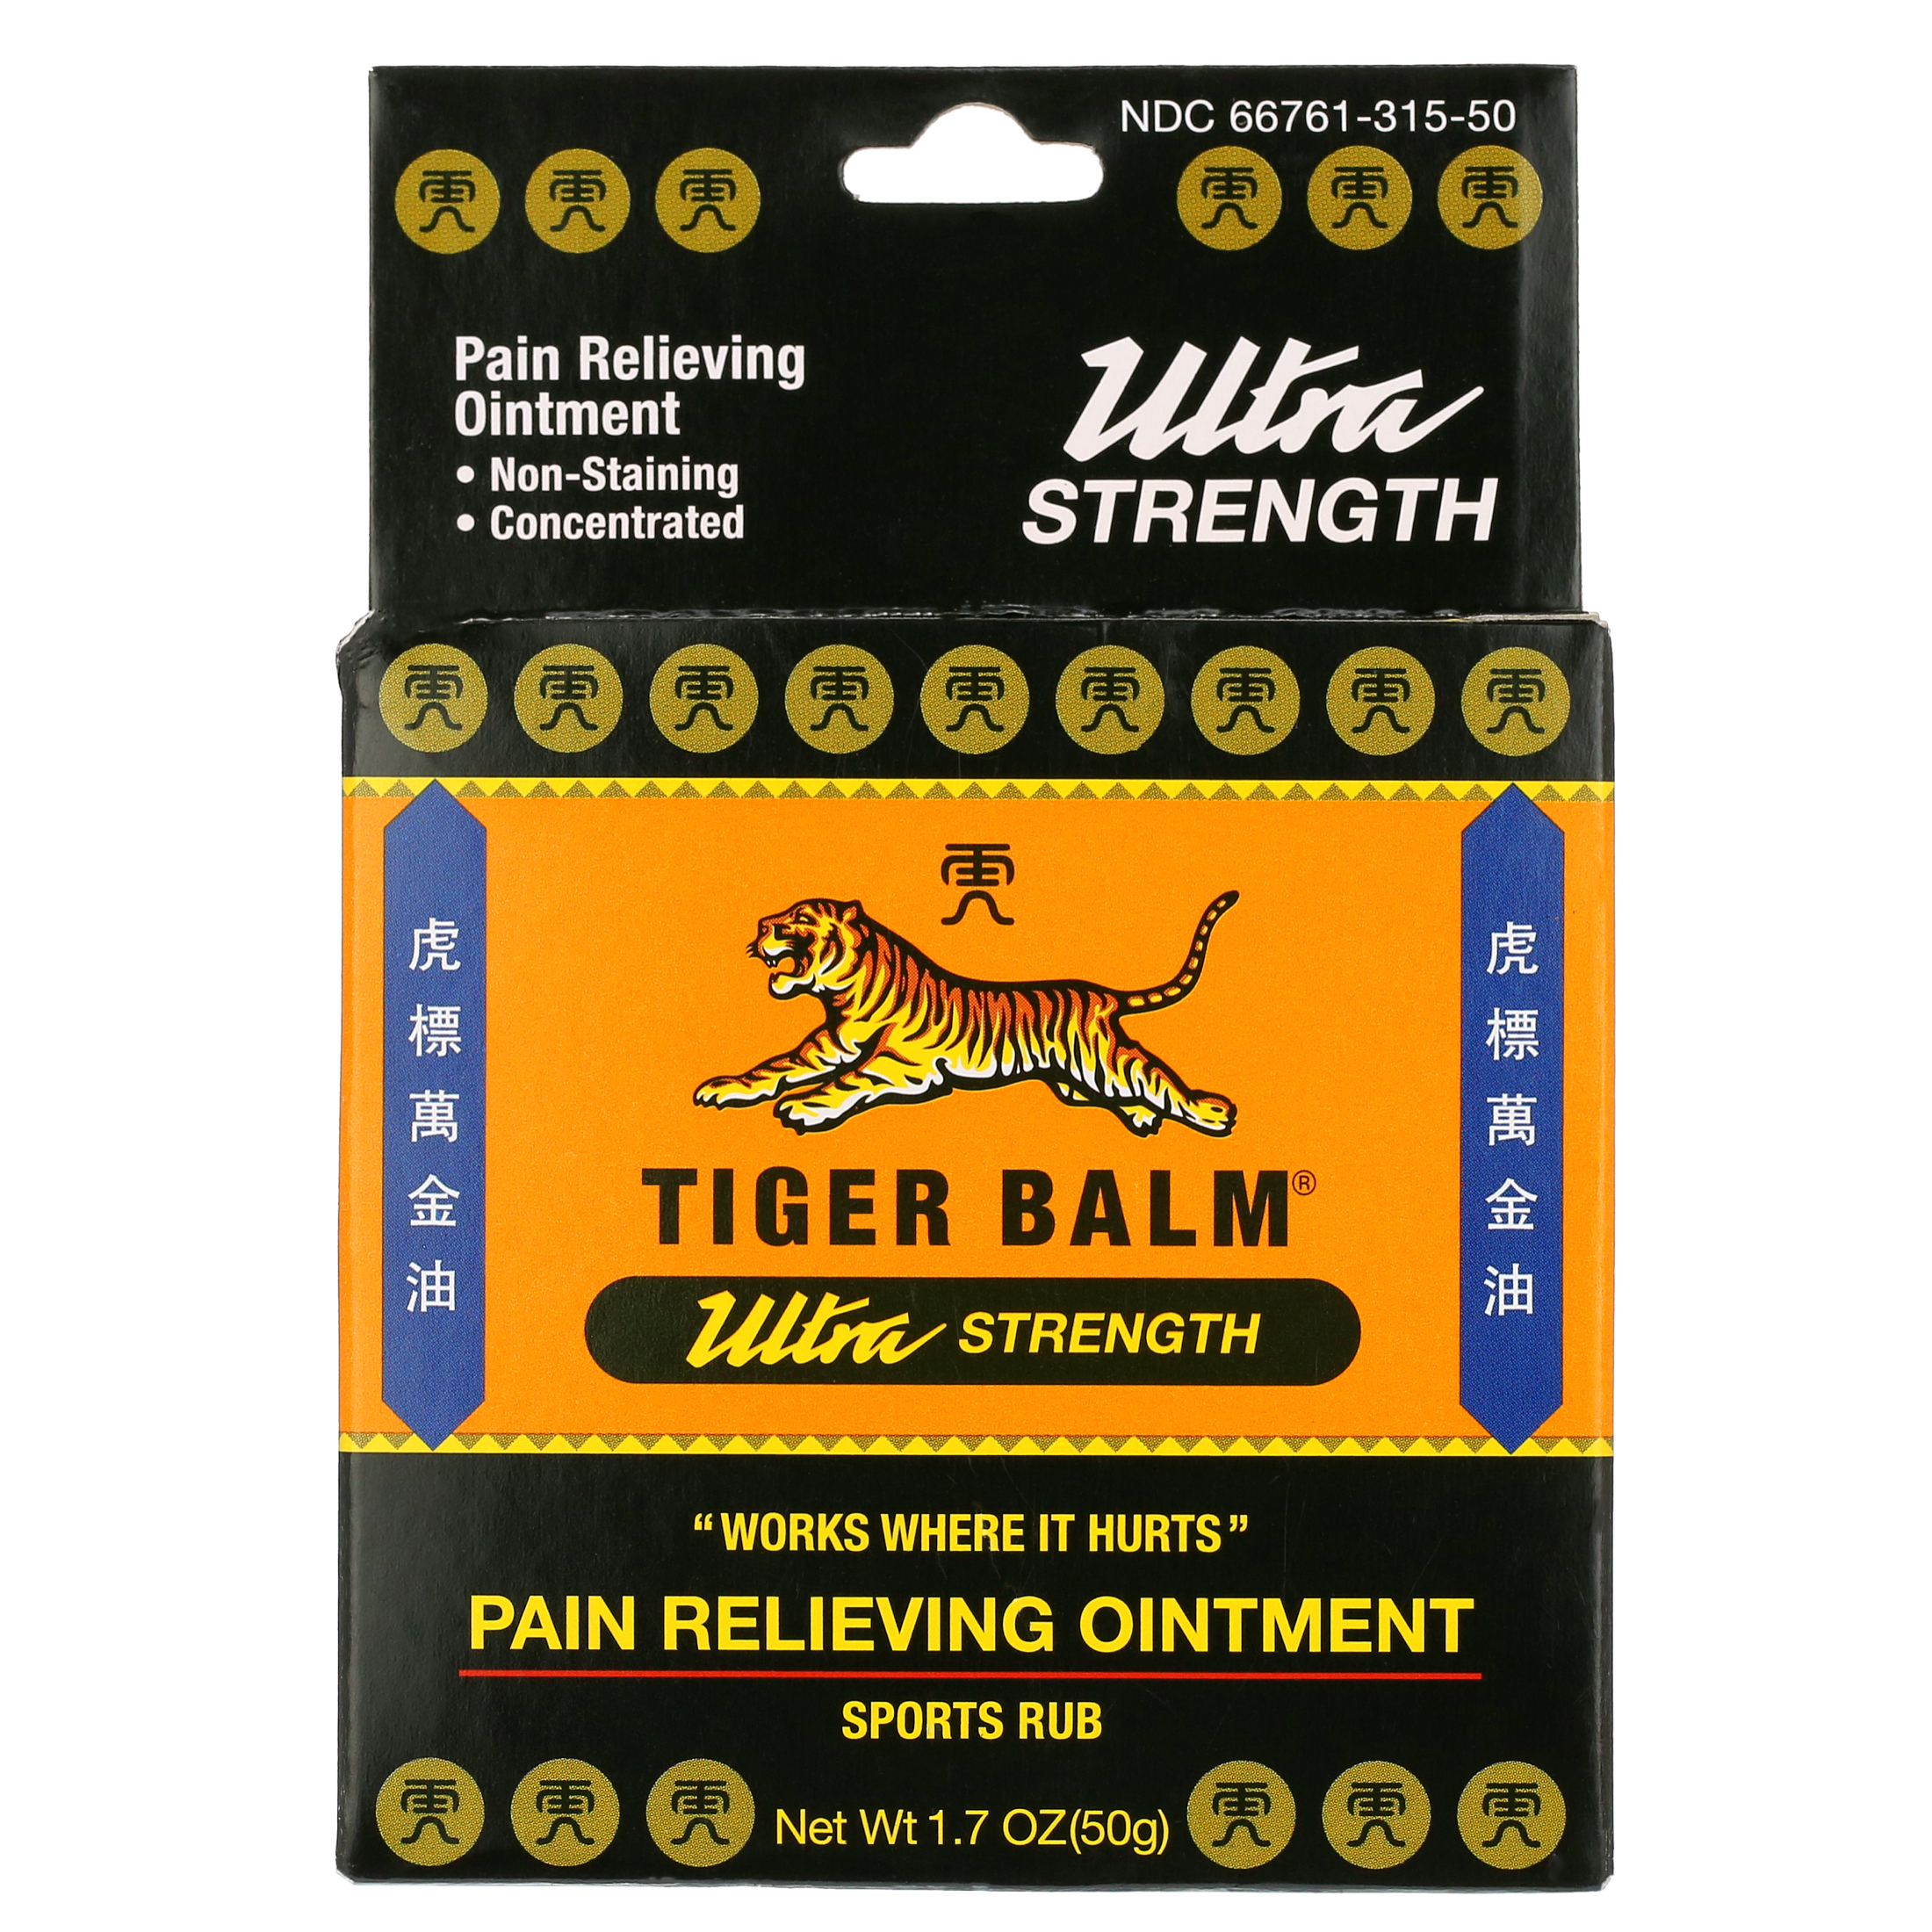 Tiger Balm Ultra Strength Pain Relieving Ointment, 1.7 oz Value Sized tin for Backaches Sore Muscles Bruises and Sprains - image 2 of 7